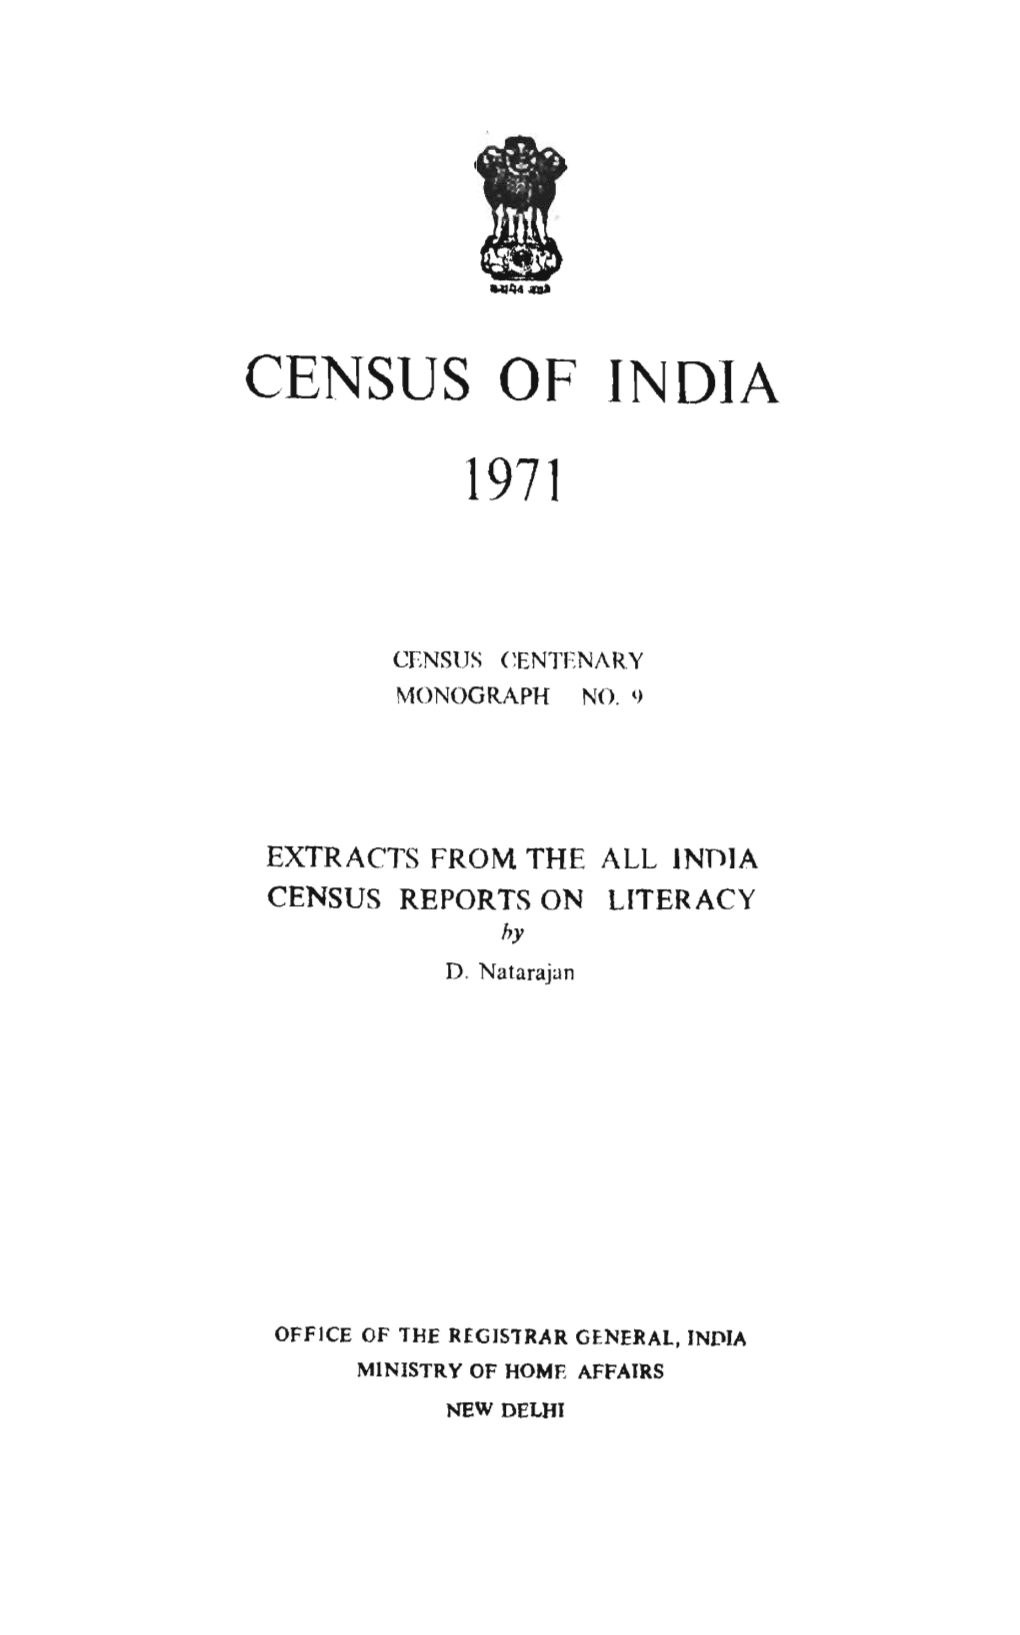 Extracts from the All India Census Reports on Literacy